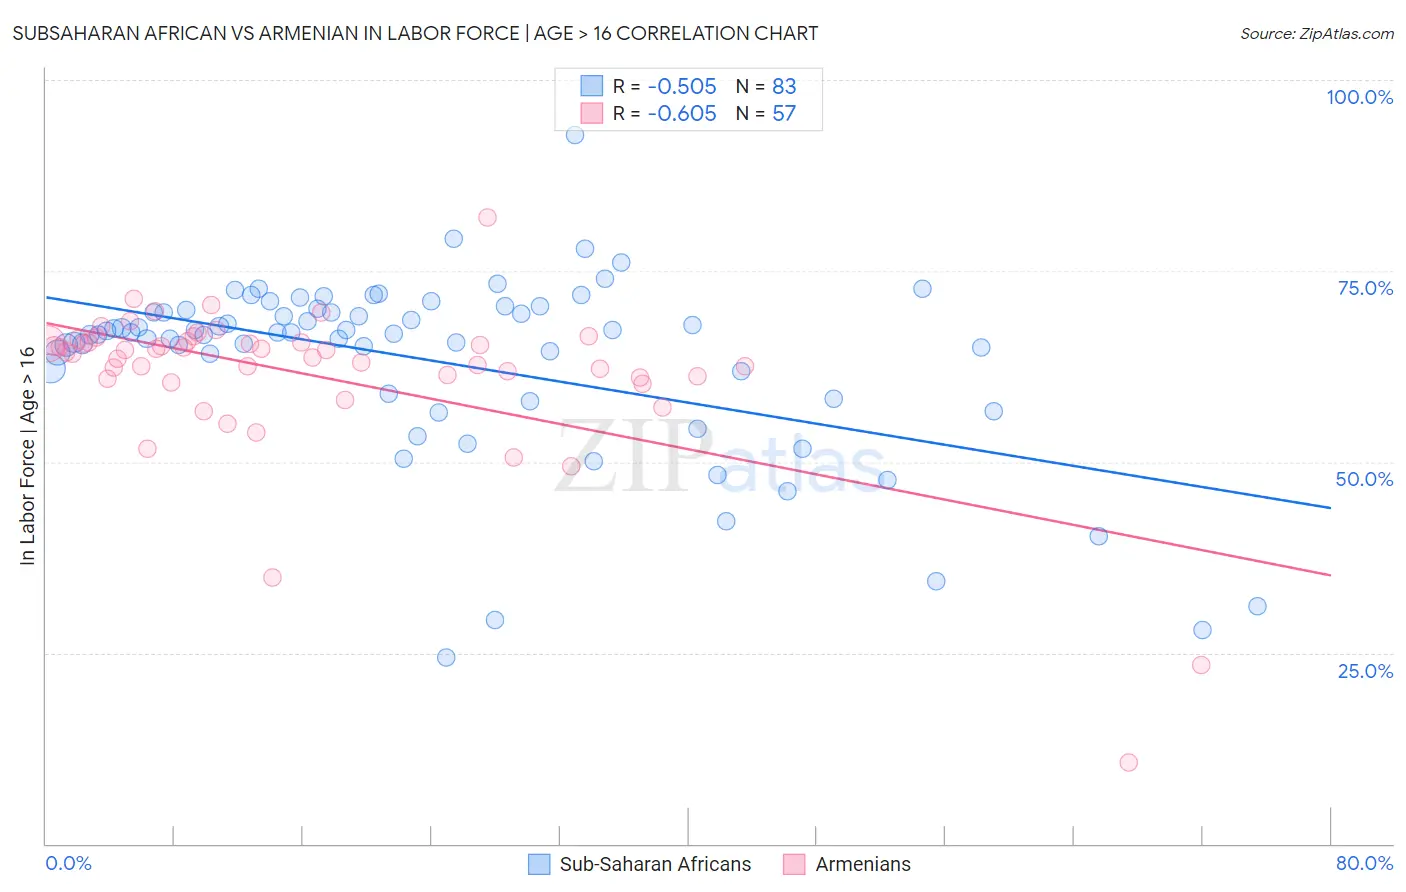 Subsaharan African vs Armenian In Labor Force | Age > 16